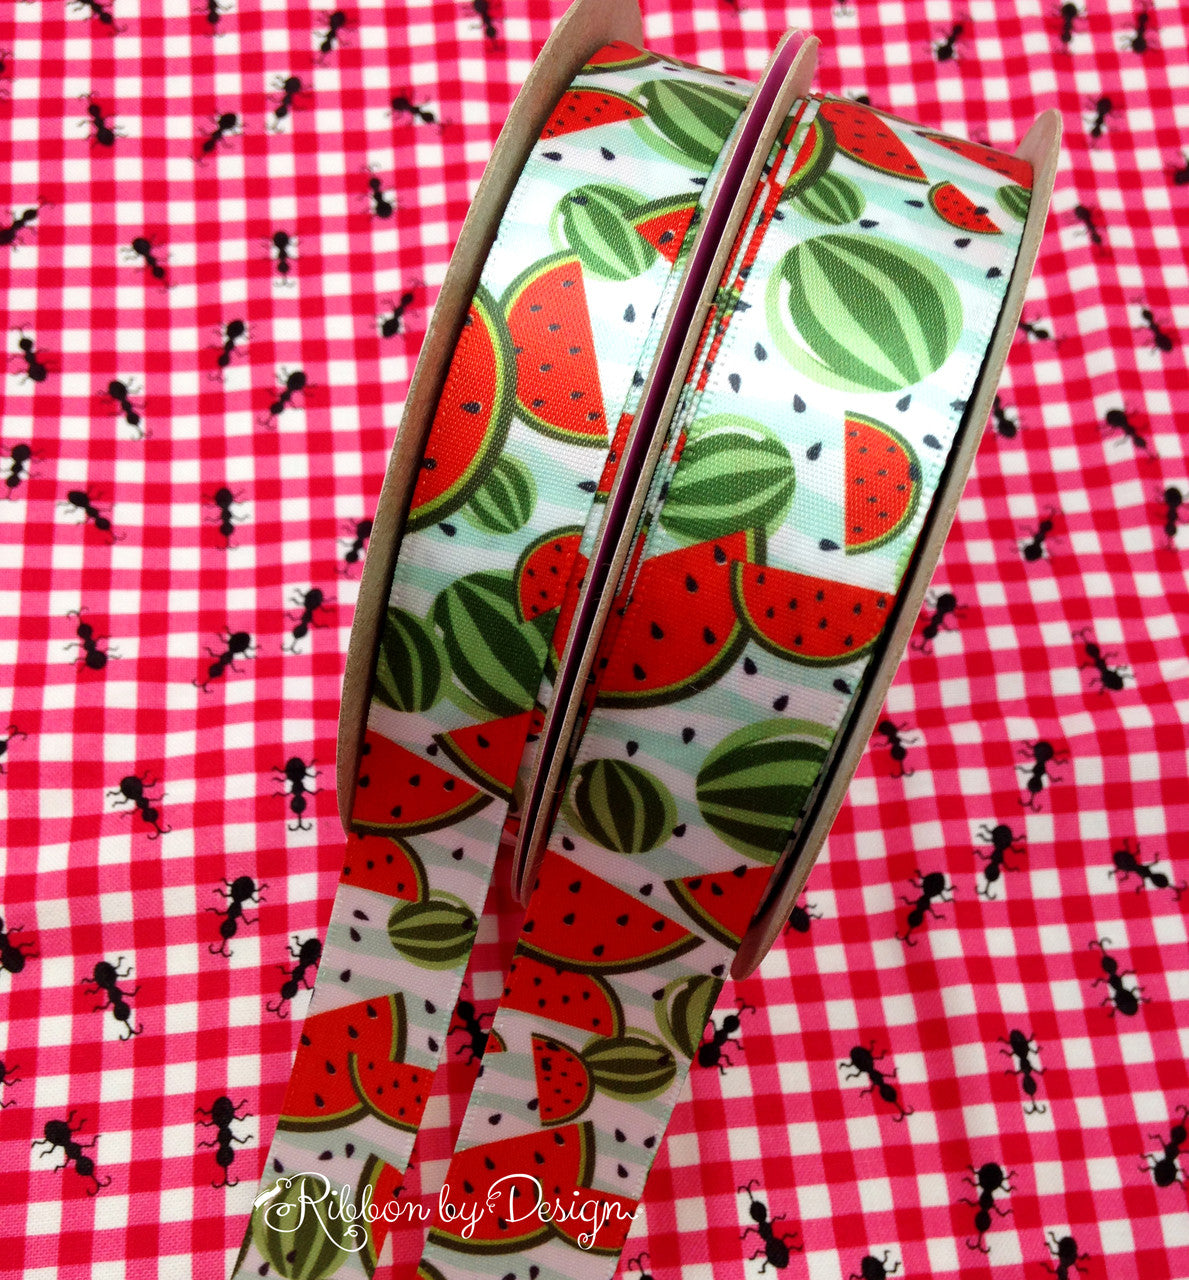 Our Summer watermelons come in 5/8" and 7/8" widths. Make your picnic party so much fun by adding our watermelon ribbon to the mix!